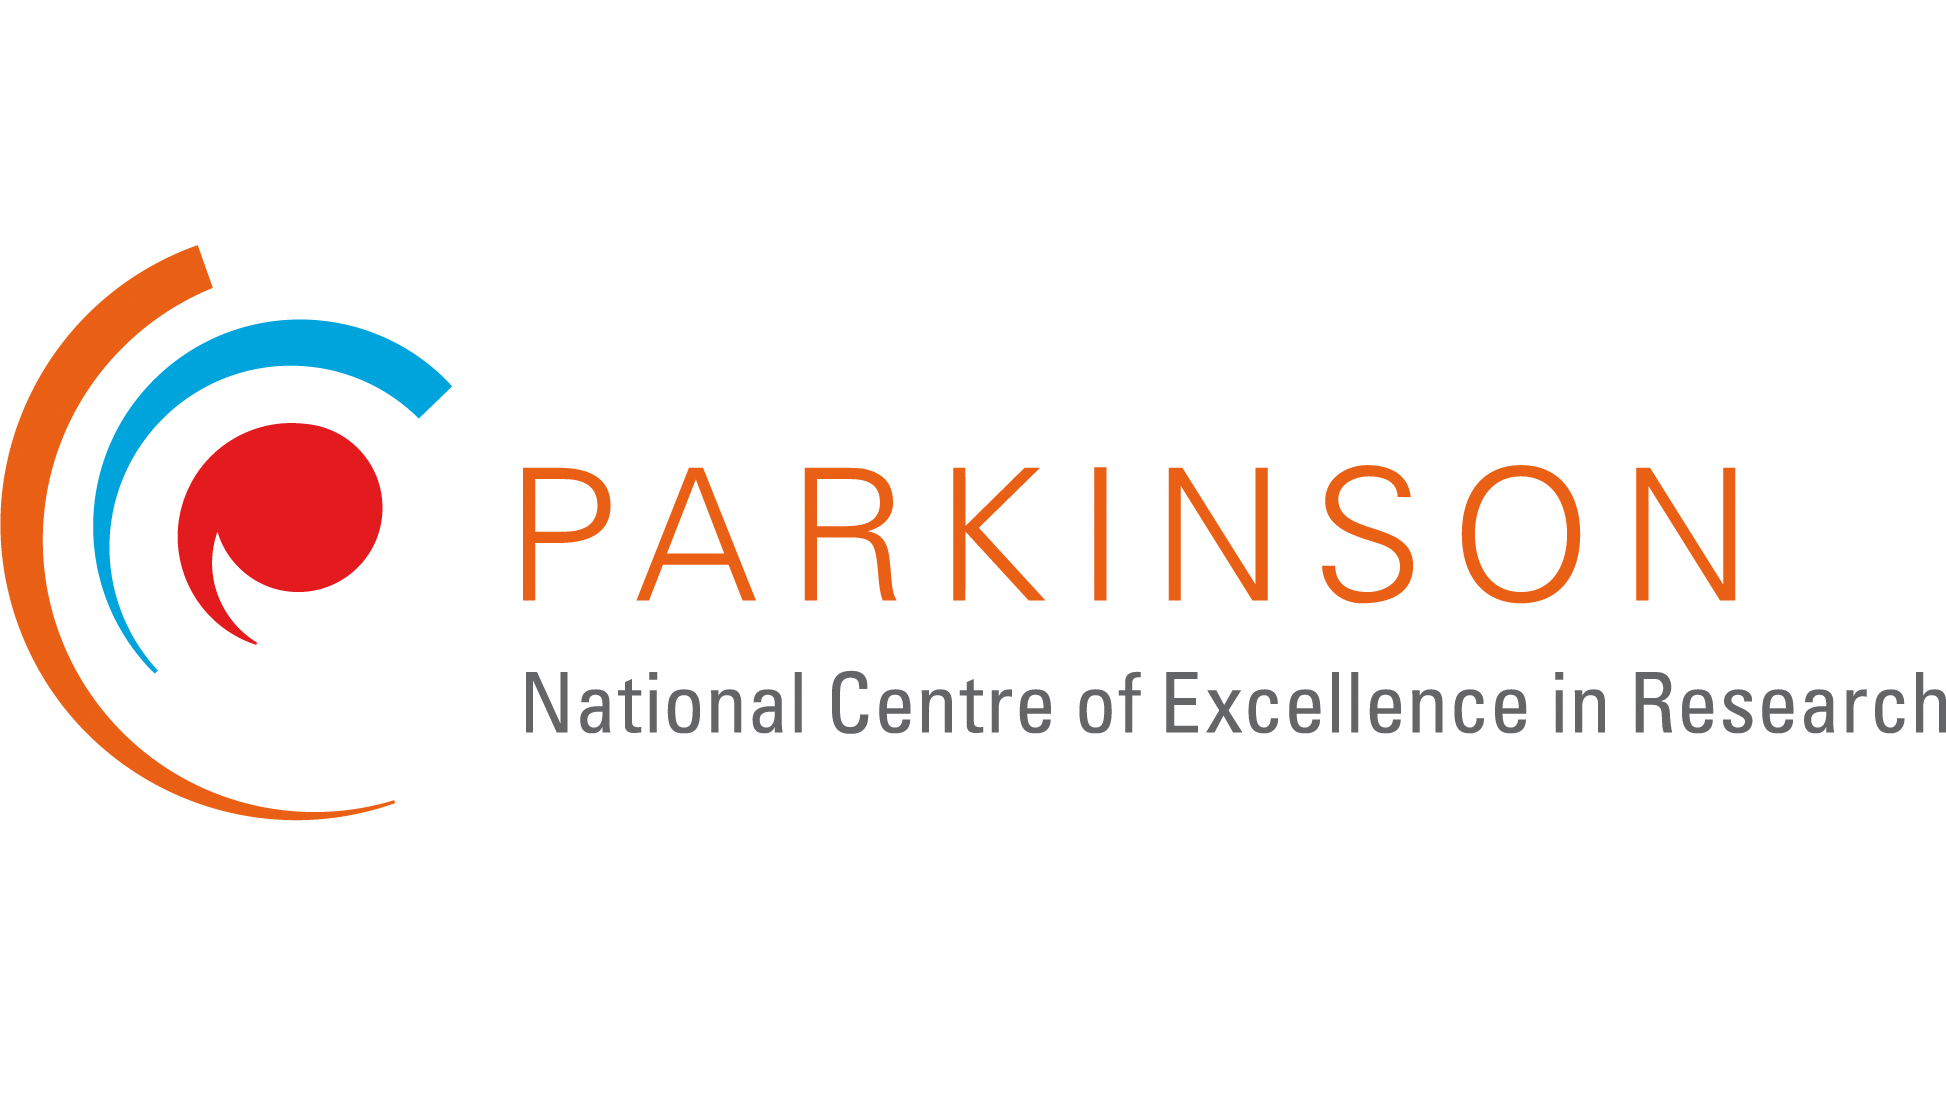 The National Centre of Excellence in Research on Parkinson